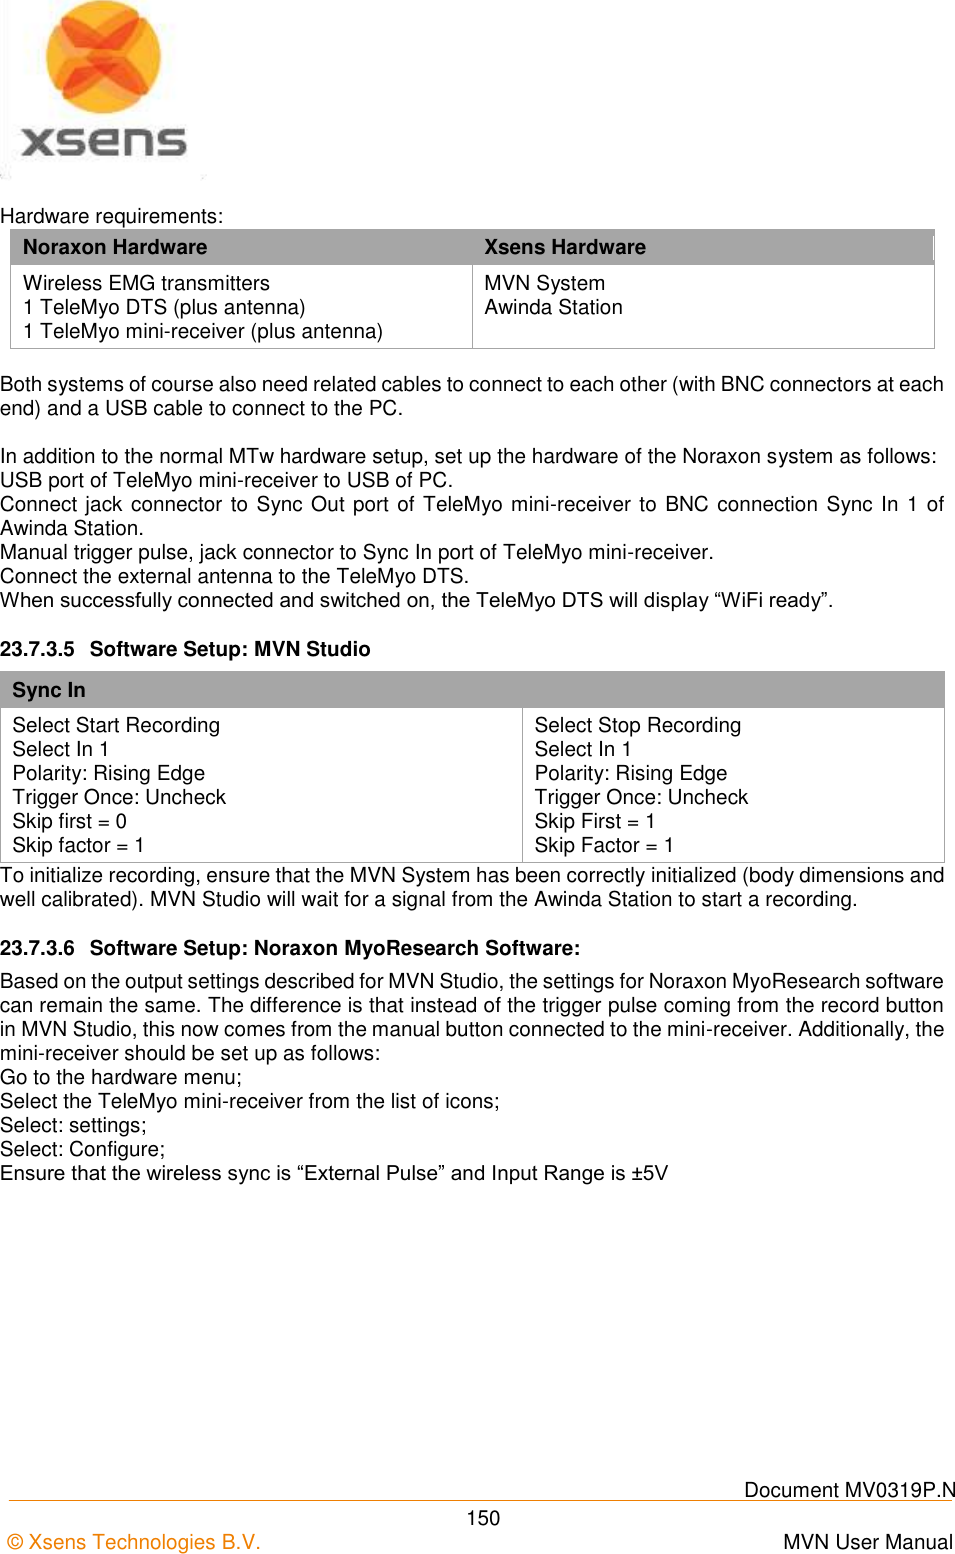    Document MV0319P.N © Xsens Technologies B.V.      MVN User Manual  150  Hardware requirements: Noraxon Hardware Xsens Hardware Wireless EMG transmitters 1 TeleMyo DTS (plus antenna) 1 TeleMyo mini-receiver (plus antenna) MVN System Awinda Station  Both systems of course also need related cables to connect to each other (with BNC connectors at each end) and a USB cable to connect to the PC.  In addition to the normal MTw hardware setup, set up the hardware of the Noraxon system as follows: USB port of TeleMyo mini-receiver to USB of PC. Connect jack connector to Sync Out port of TeleMyo mini-receiver to BNC connection Sync In 1 of Awinda Station. Manual trigger pulse, jack connector to Sync In port of TeleMyo mini-receiver. Connect the external antenna to the TeleMyo DTS. When successfully connected and switched on, the TeleMyo DTS will display “WiFi ready”. 23.7.3.5  Software Setup: MVN Studio Sync In Select Start Recording Select In 1 Polarity: Rising Edge Trigger Once: Uncheck Skip first = 0 Skip factor = 1 Select Stop Recording Select In 1 Polarity: Rising Edge  Trigger Once: Uncheck Skip First = 1 Skip Factor = 1 To initialize recording, ensure that the MVN System has been correctly initialized (body dimensions and well calibrated). MVN Studio will wait for a signal from the Awinda Station to start a recording. 23.7.3.6  Software Setup: Noraxon MyoResearch Software: Based on the output settings described for MVN Studio, the settings for Noraxon MyoResearch software can remain the same. The difference is that instead of the trigger pulse coming from the record button in MVN Studio, this now comes from the manual button connected to the mini-receiver. Additionally, the mini-receiver should be set up as follows: Go to the hardware menu; Select the TeleMyo mini-receiver from the list of icons; Select: settings; Select: Configure; Ensure that the wireless sync is “External Pulse” and Input Range is ±5V 